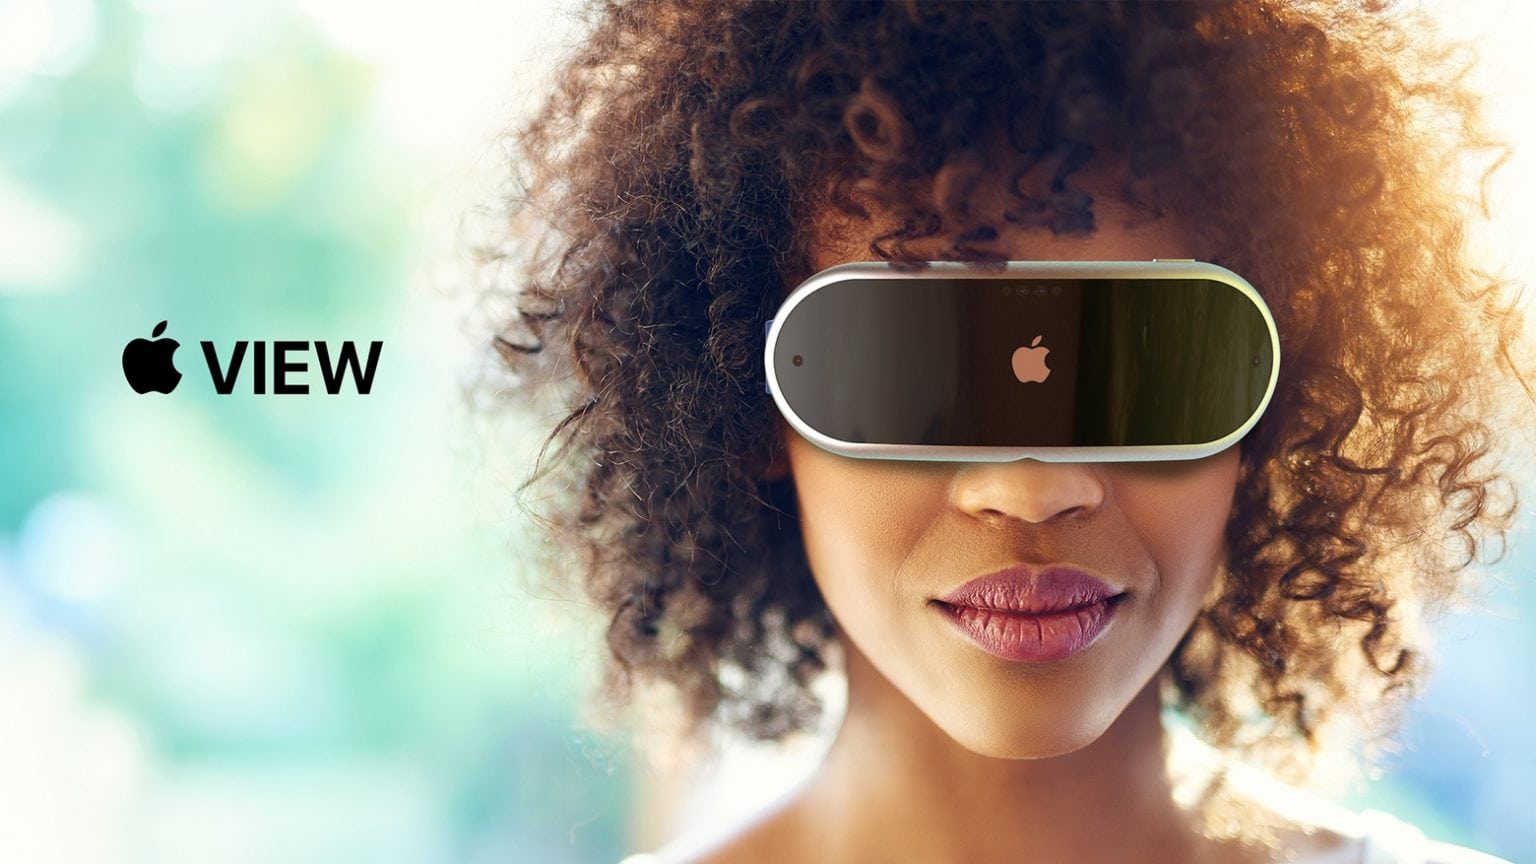 This Apple VR headset concept